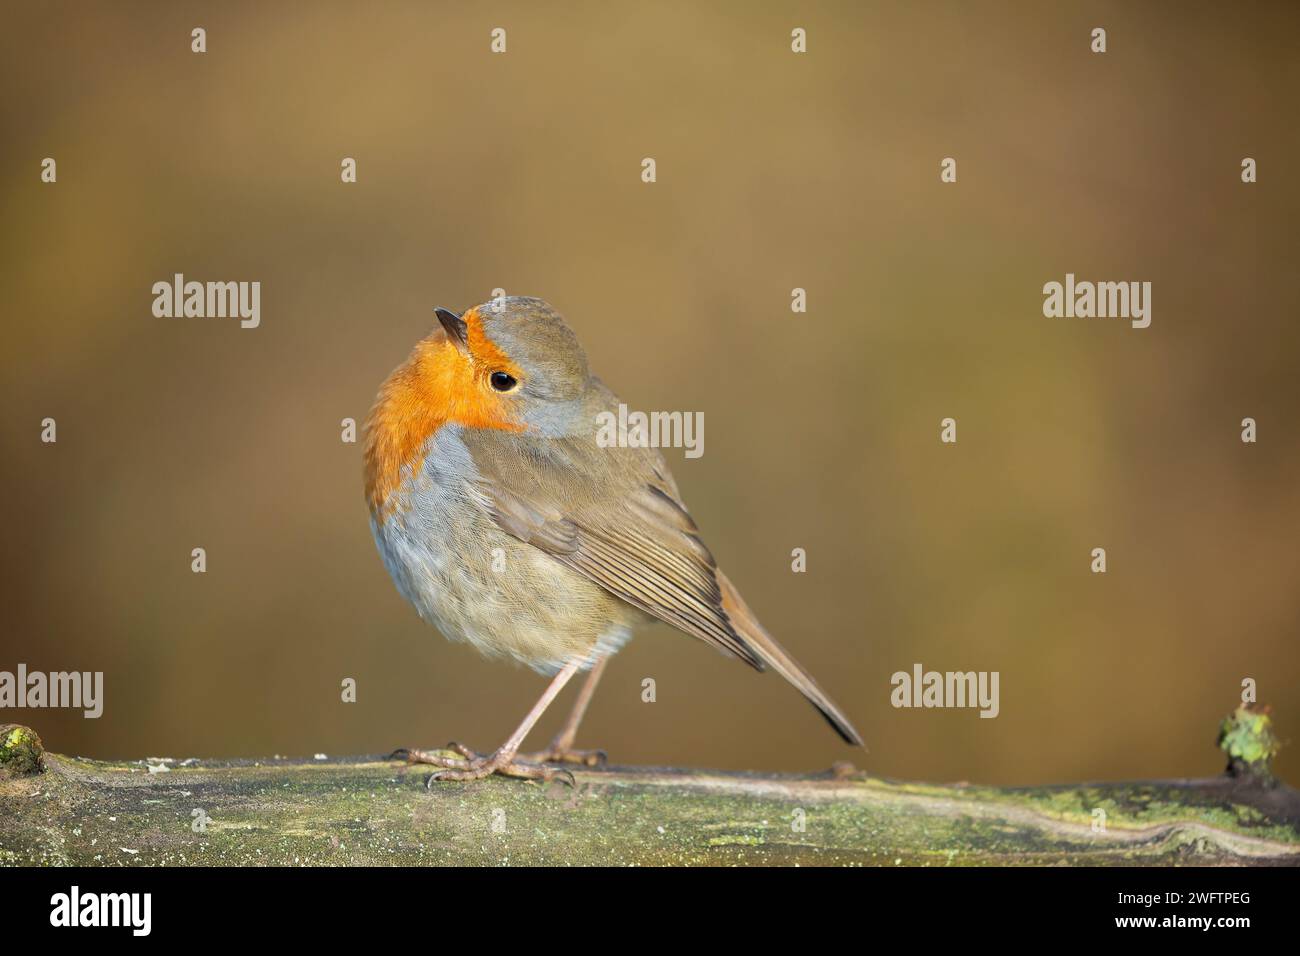 Side view of a wild, UK robin bird (Erithacus rubecula) tilting its head to the side, standing on a log with a soft-focus, warm background. Stock Photo